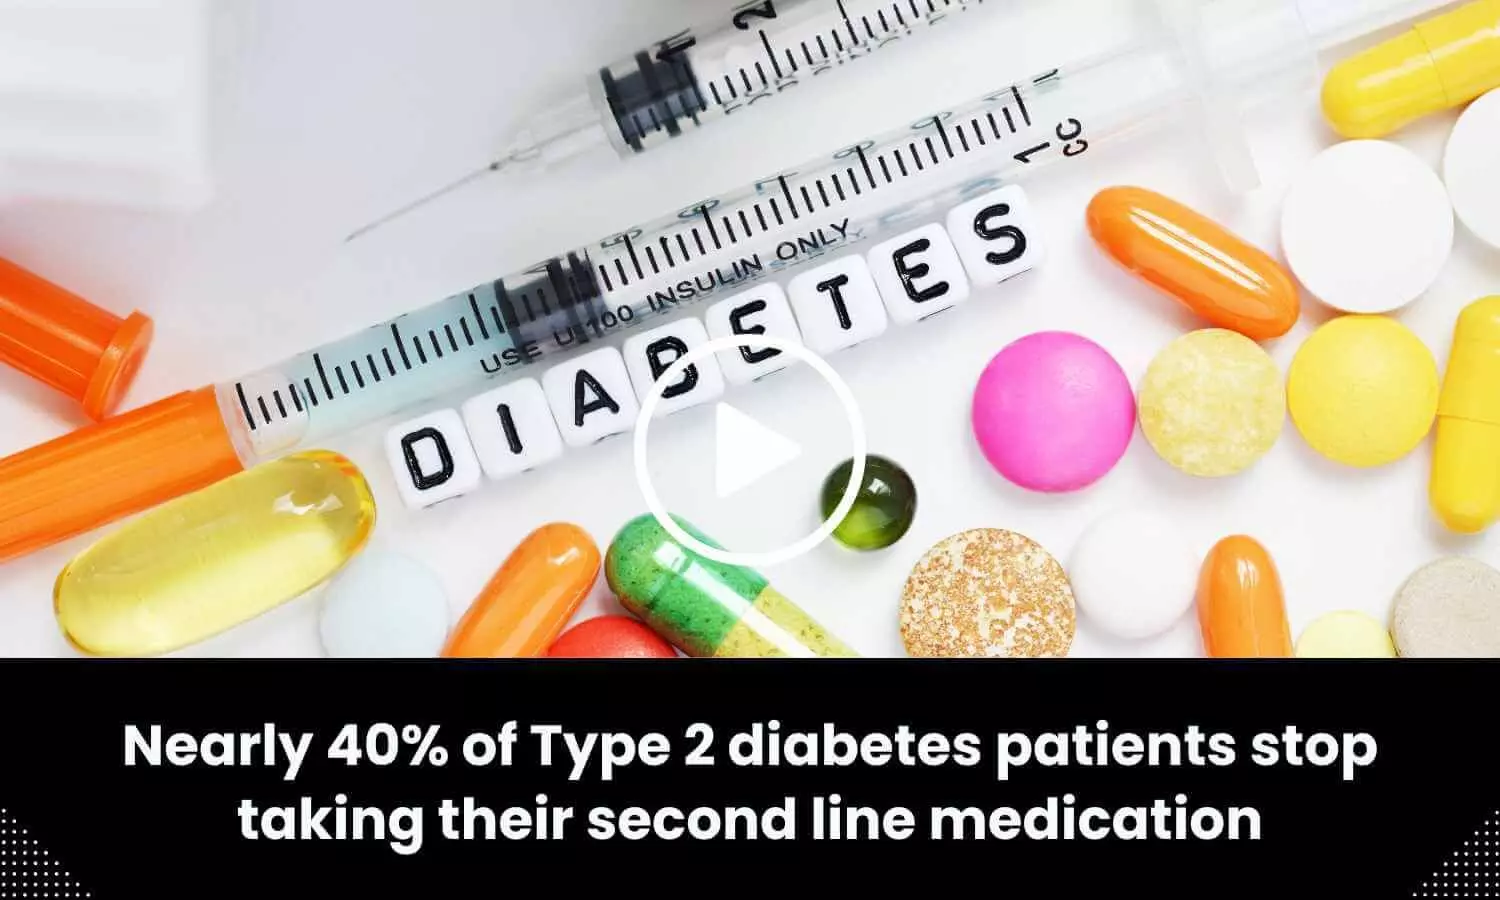 Nearly 40% of Type 2 diabetes patients stop taking their second line medication